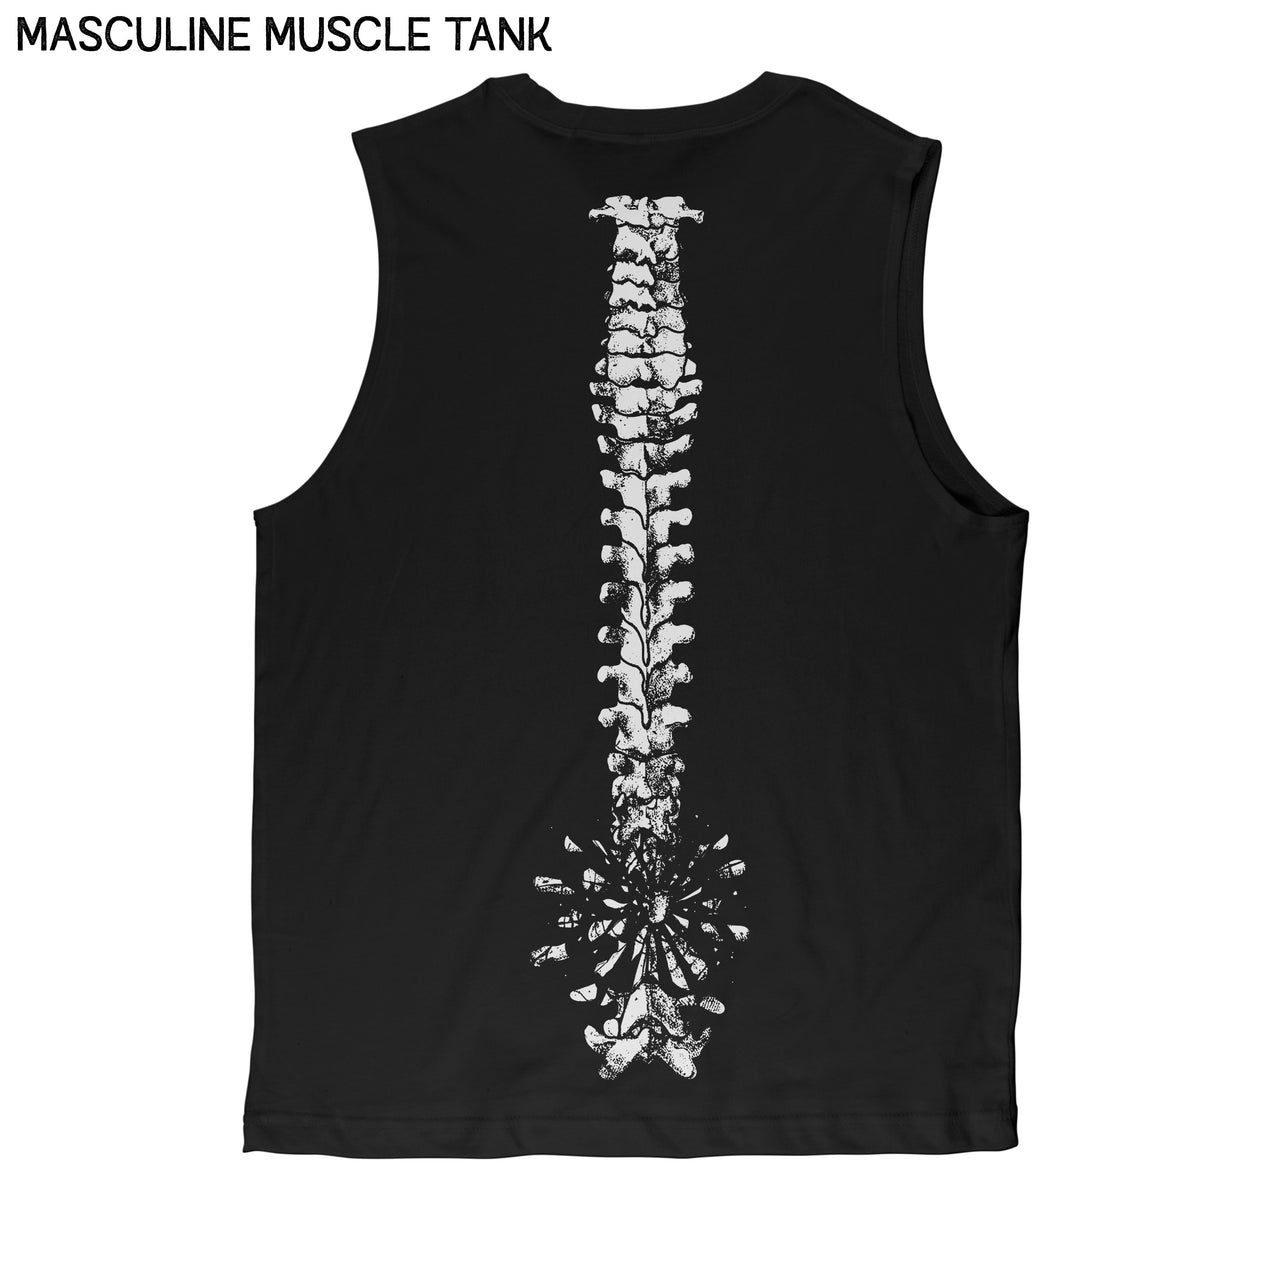 Back Pain Muscle Tank Top